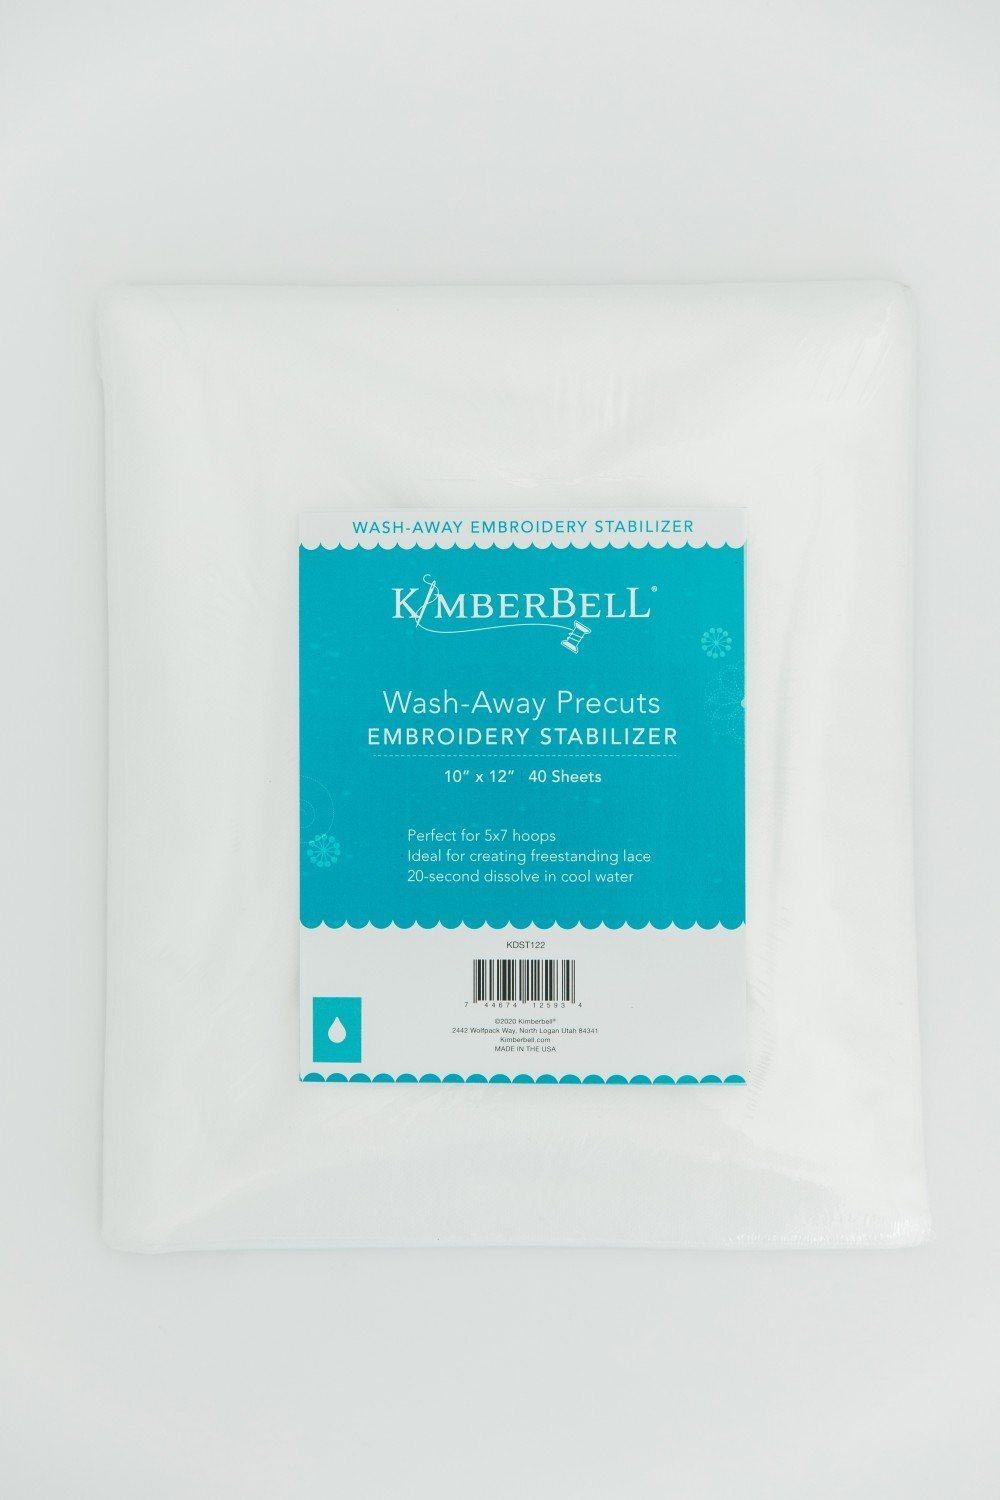 Wash-Away Stabilizer - 12" x 10" Precuts - Package of 40 - Kimberbell - Kawartha Quilting and Sewing LTD.